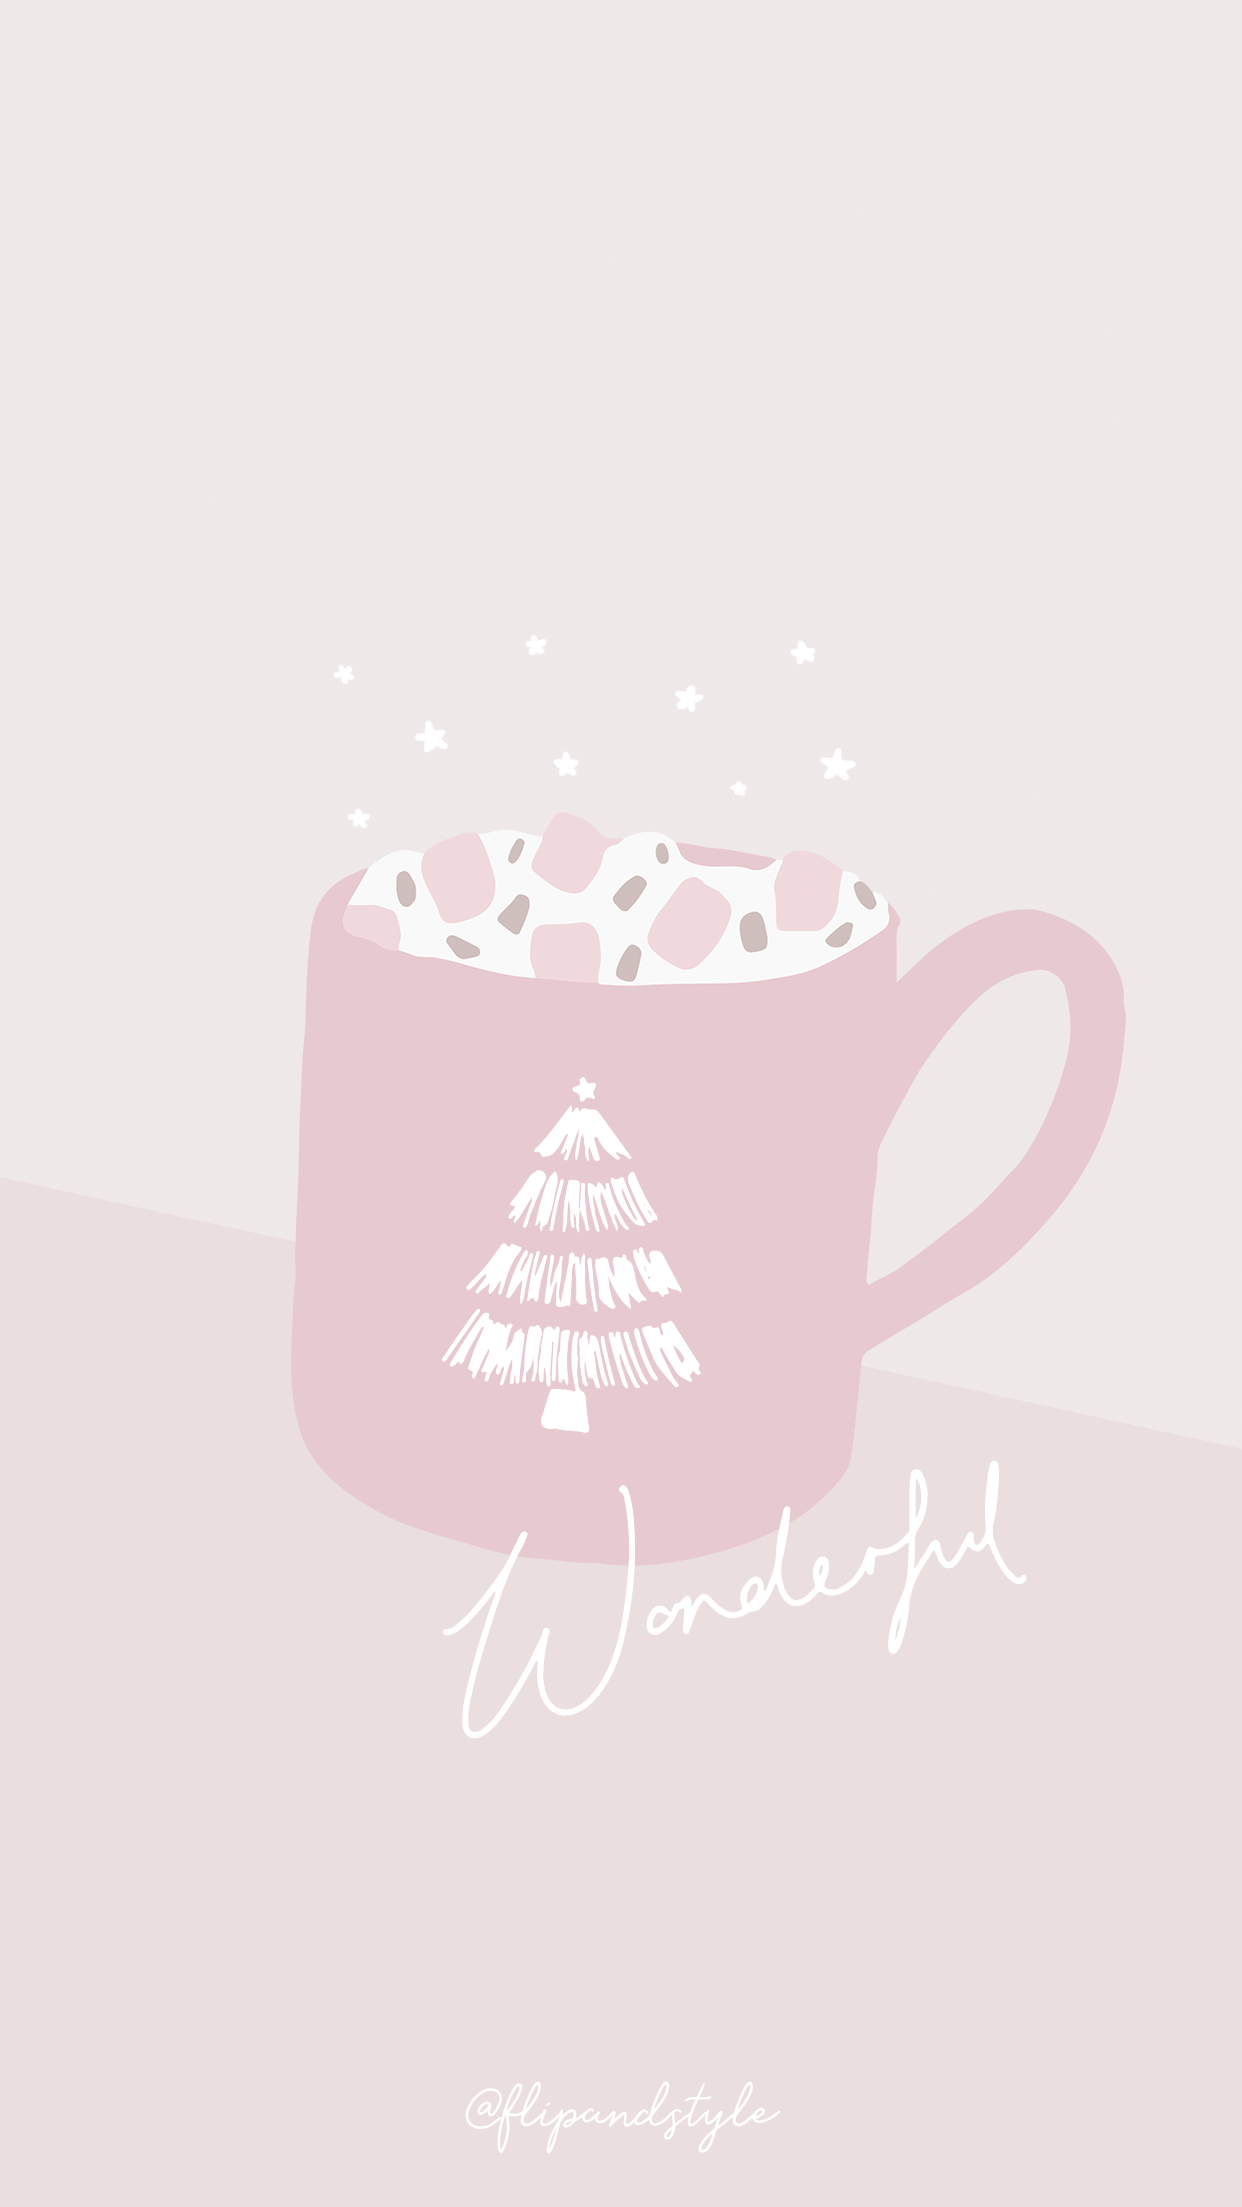 Free Wallpapers Backgrounds Christmas Festive by Flip And Style